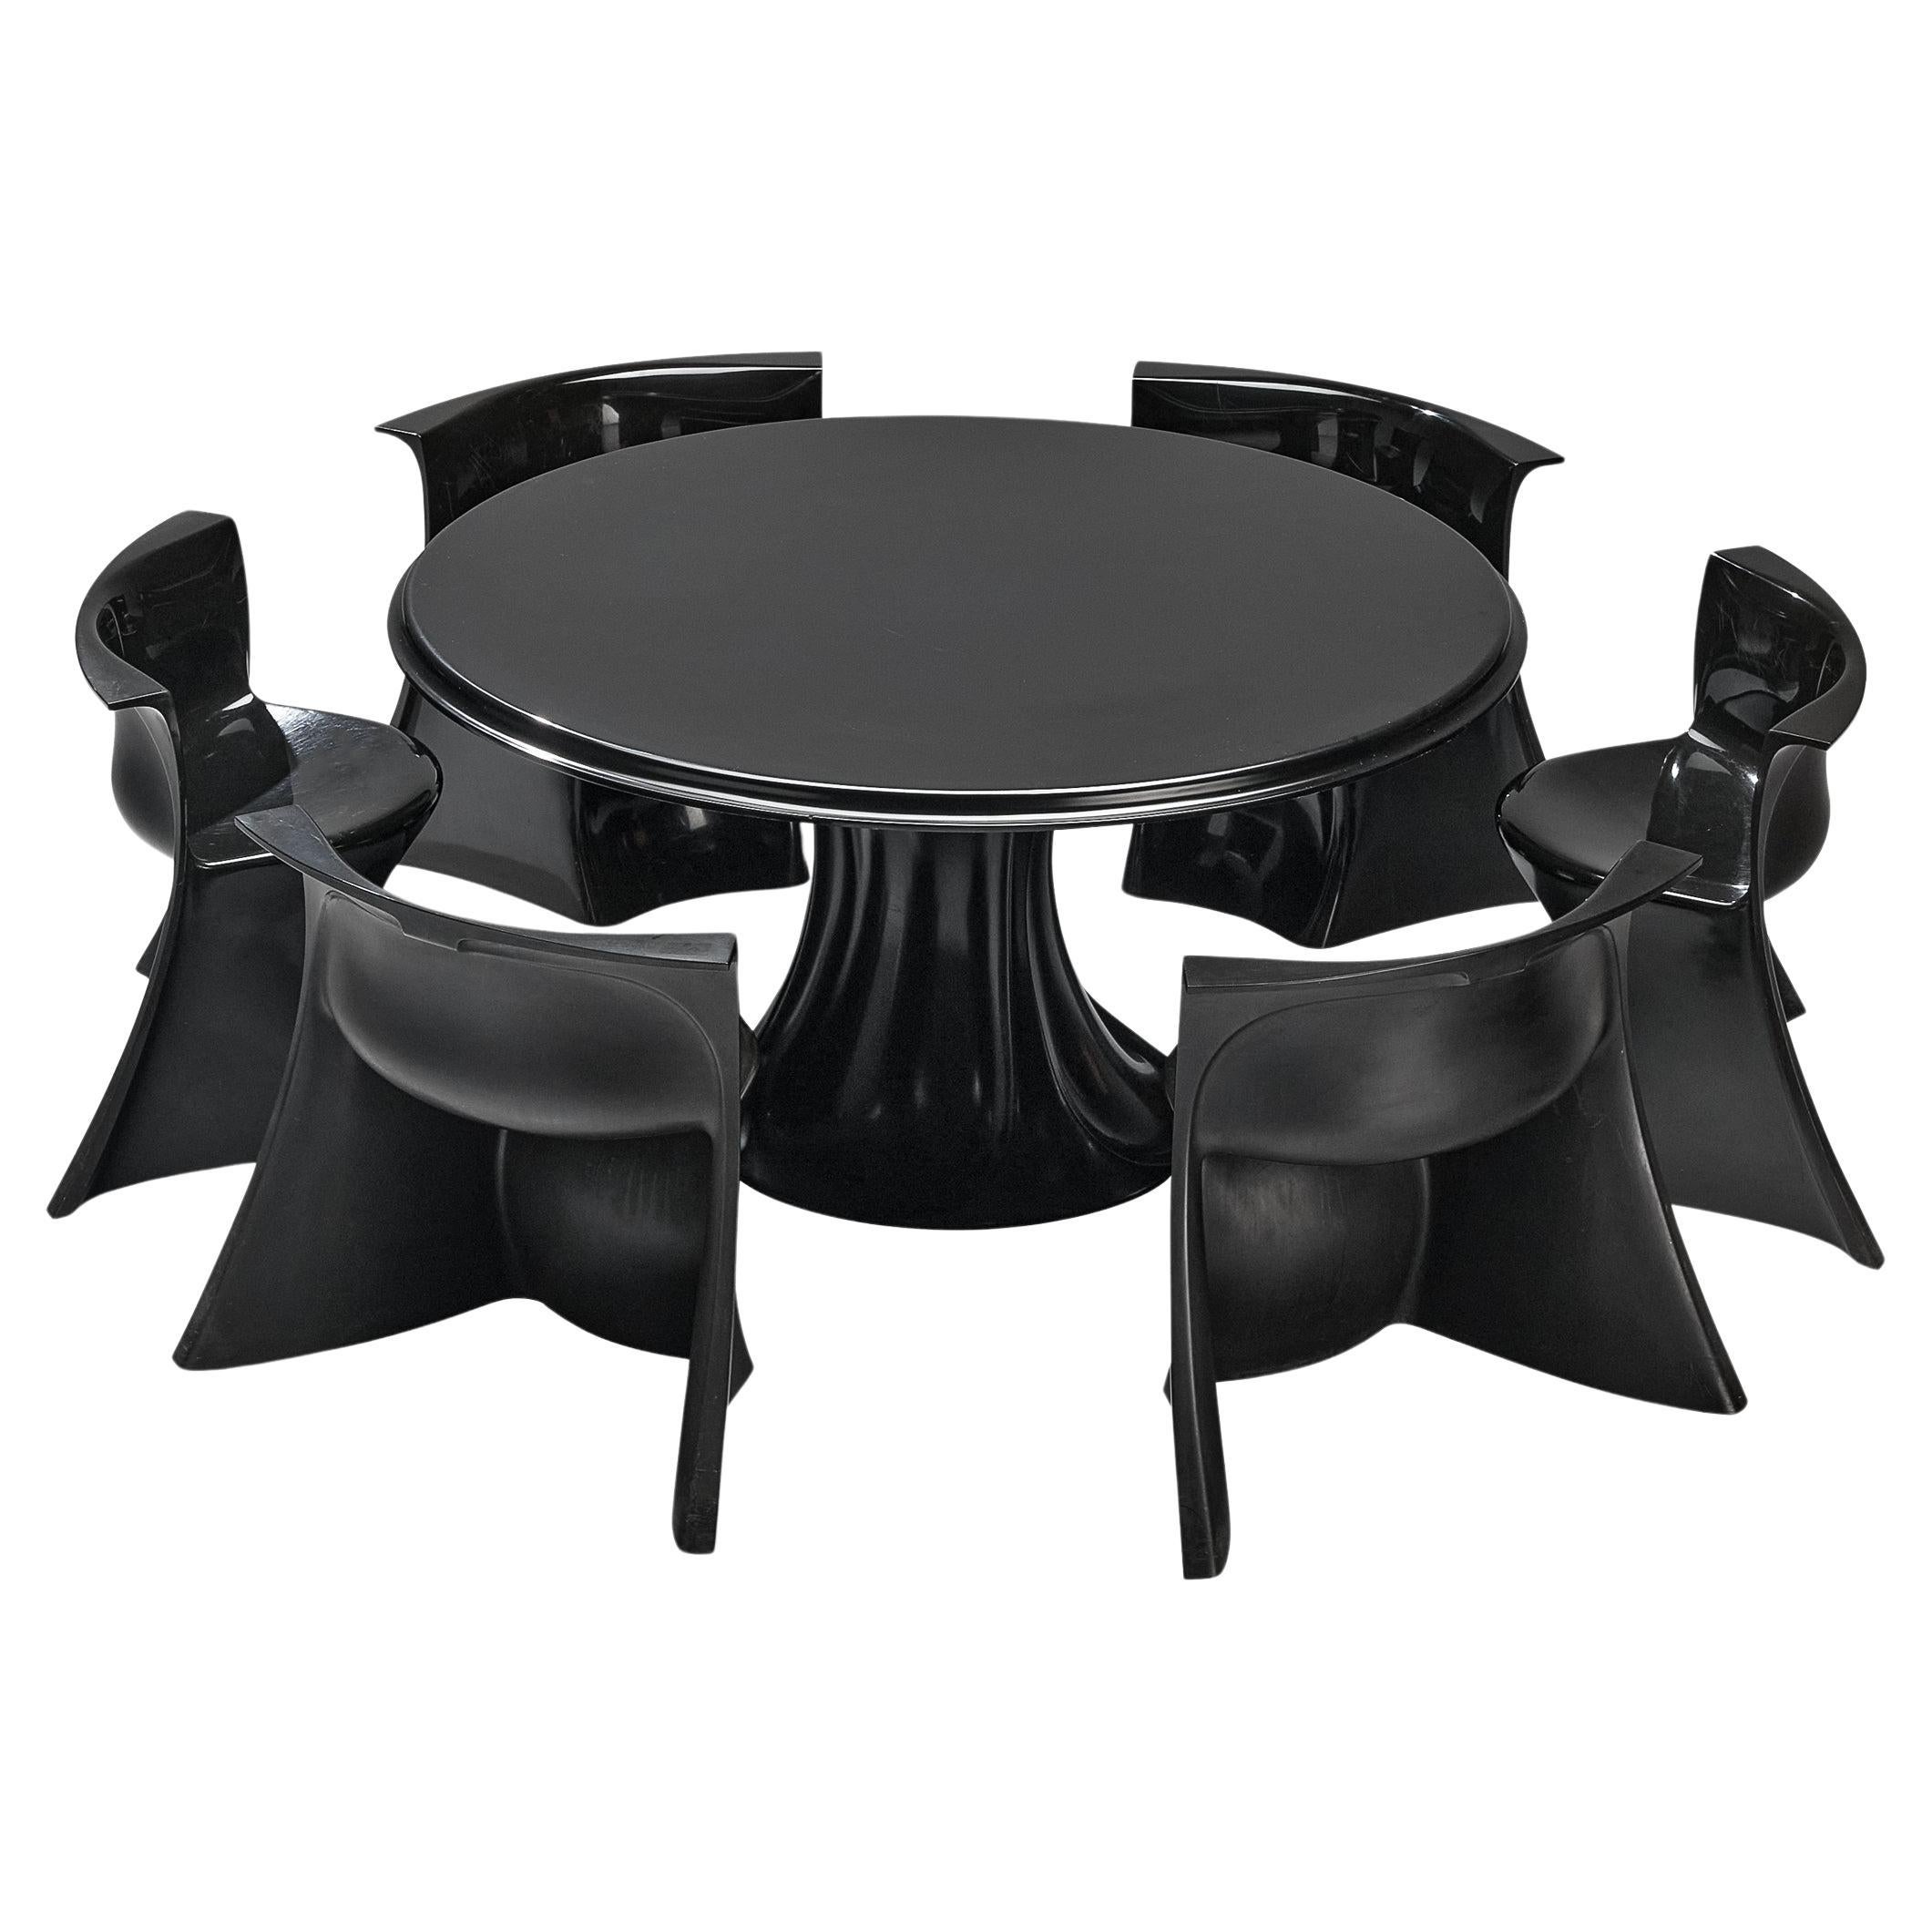 Pierluigi Spadolini for 1P 'Boccio' Dining Set with Table and Six Chairs 